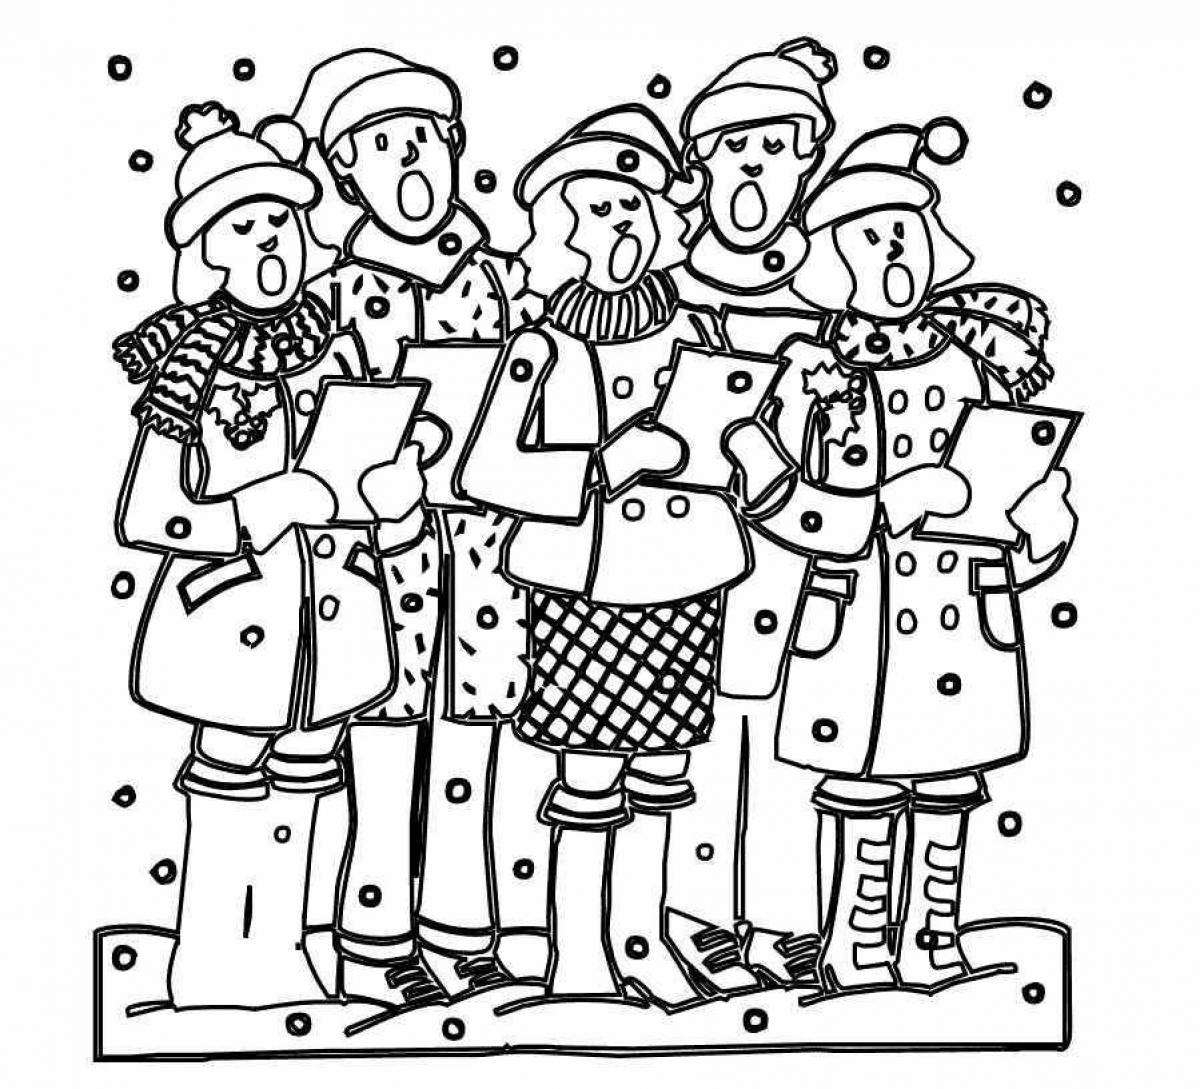 Colorful carol coloring page